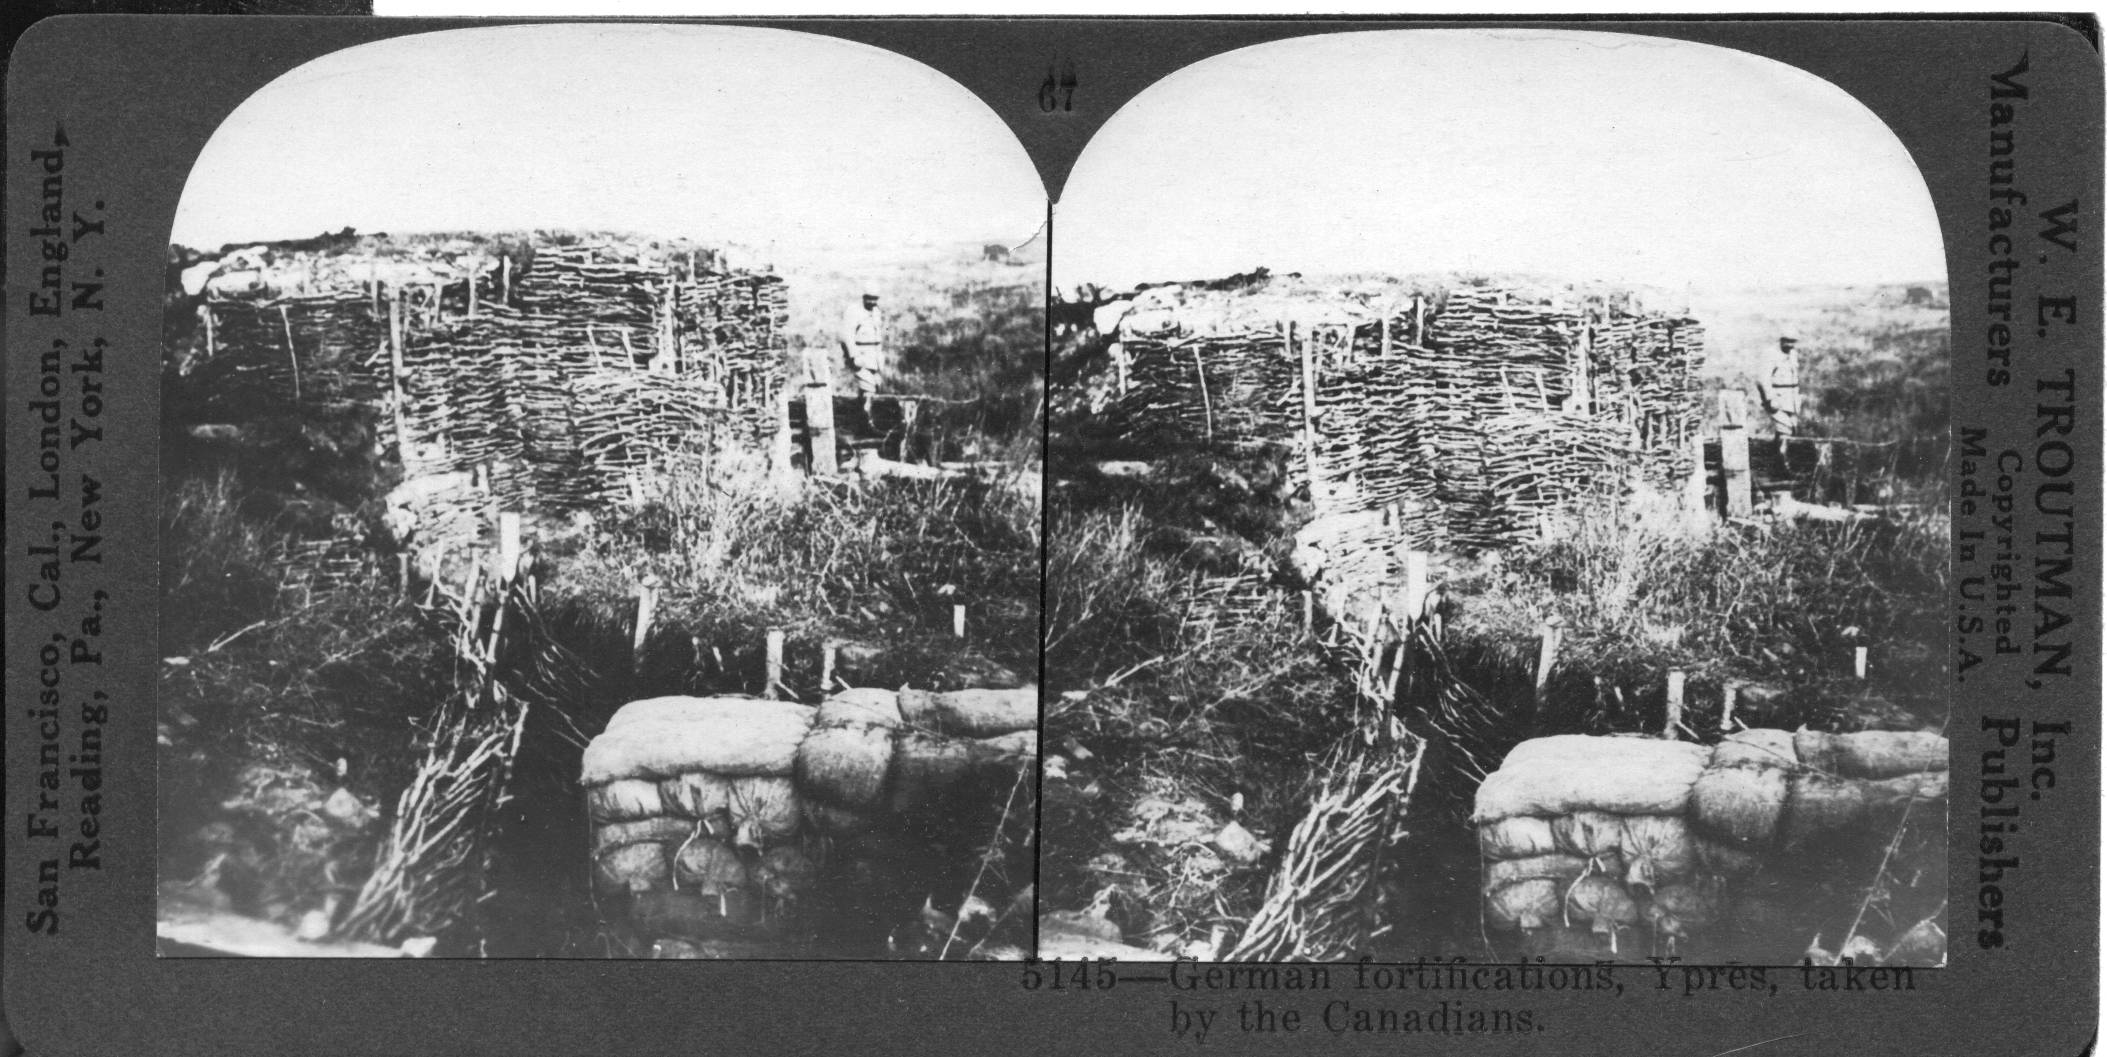 German fortifications, Ypres, taken by the Canadians